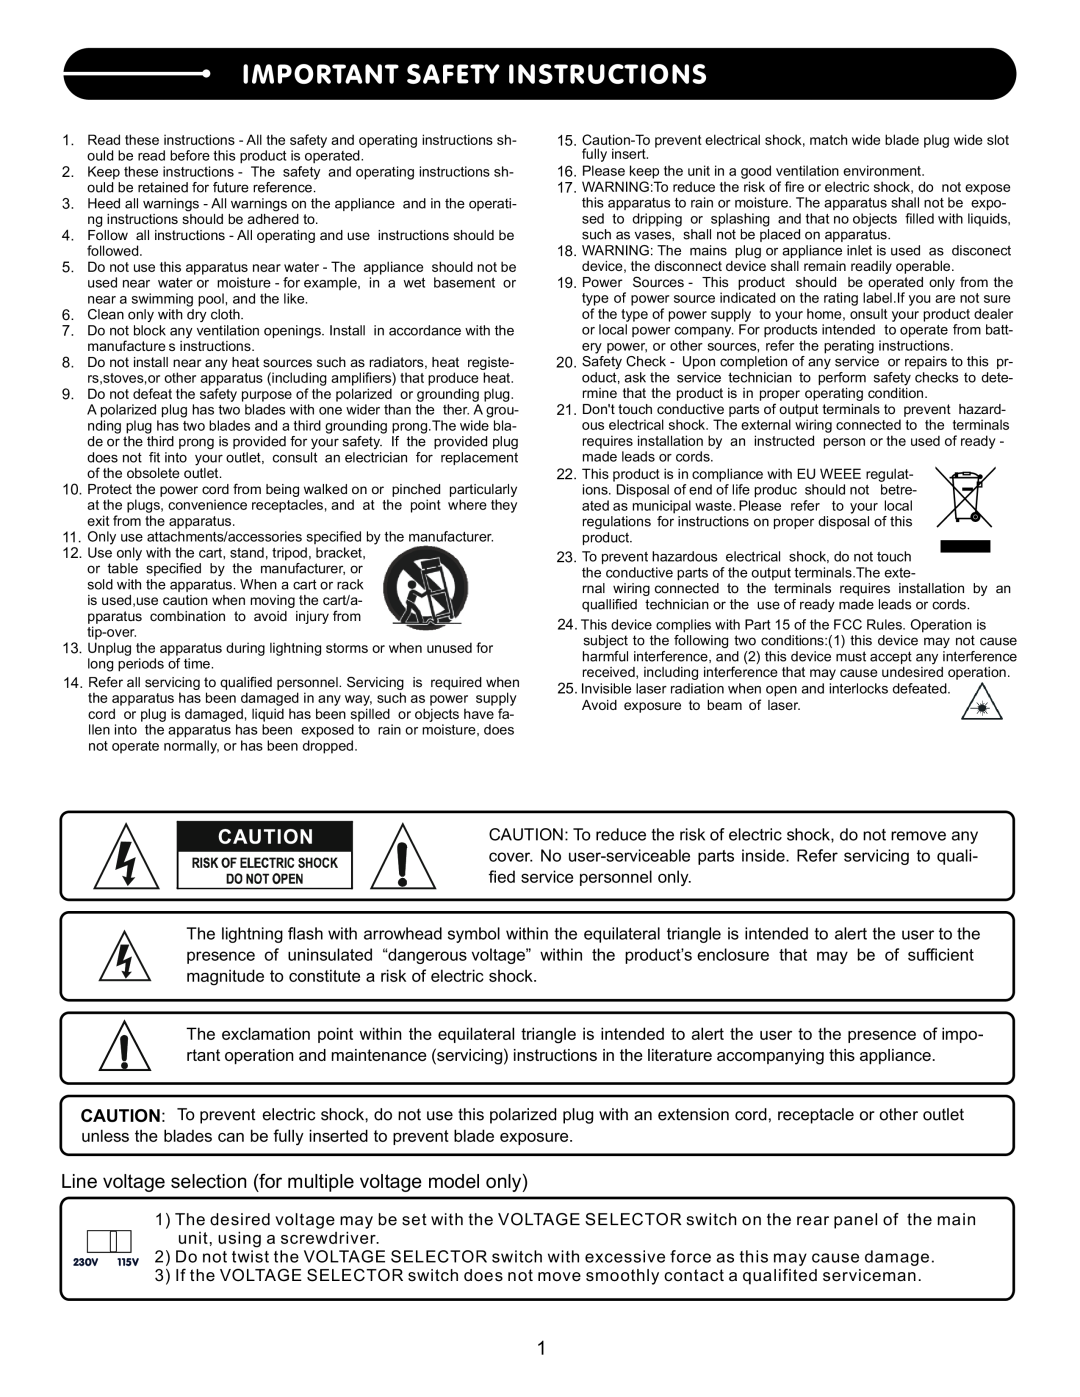 Stanton S.252 user manual Important Safety Instructions 